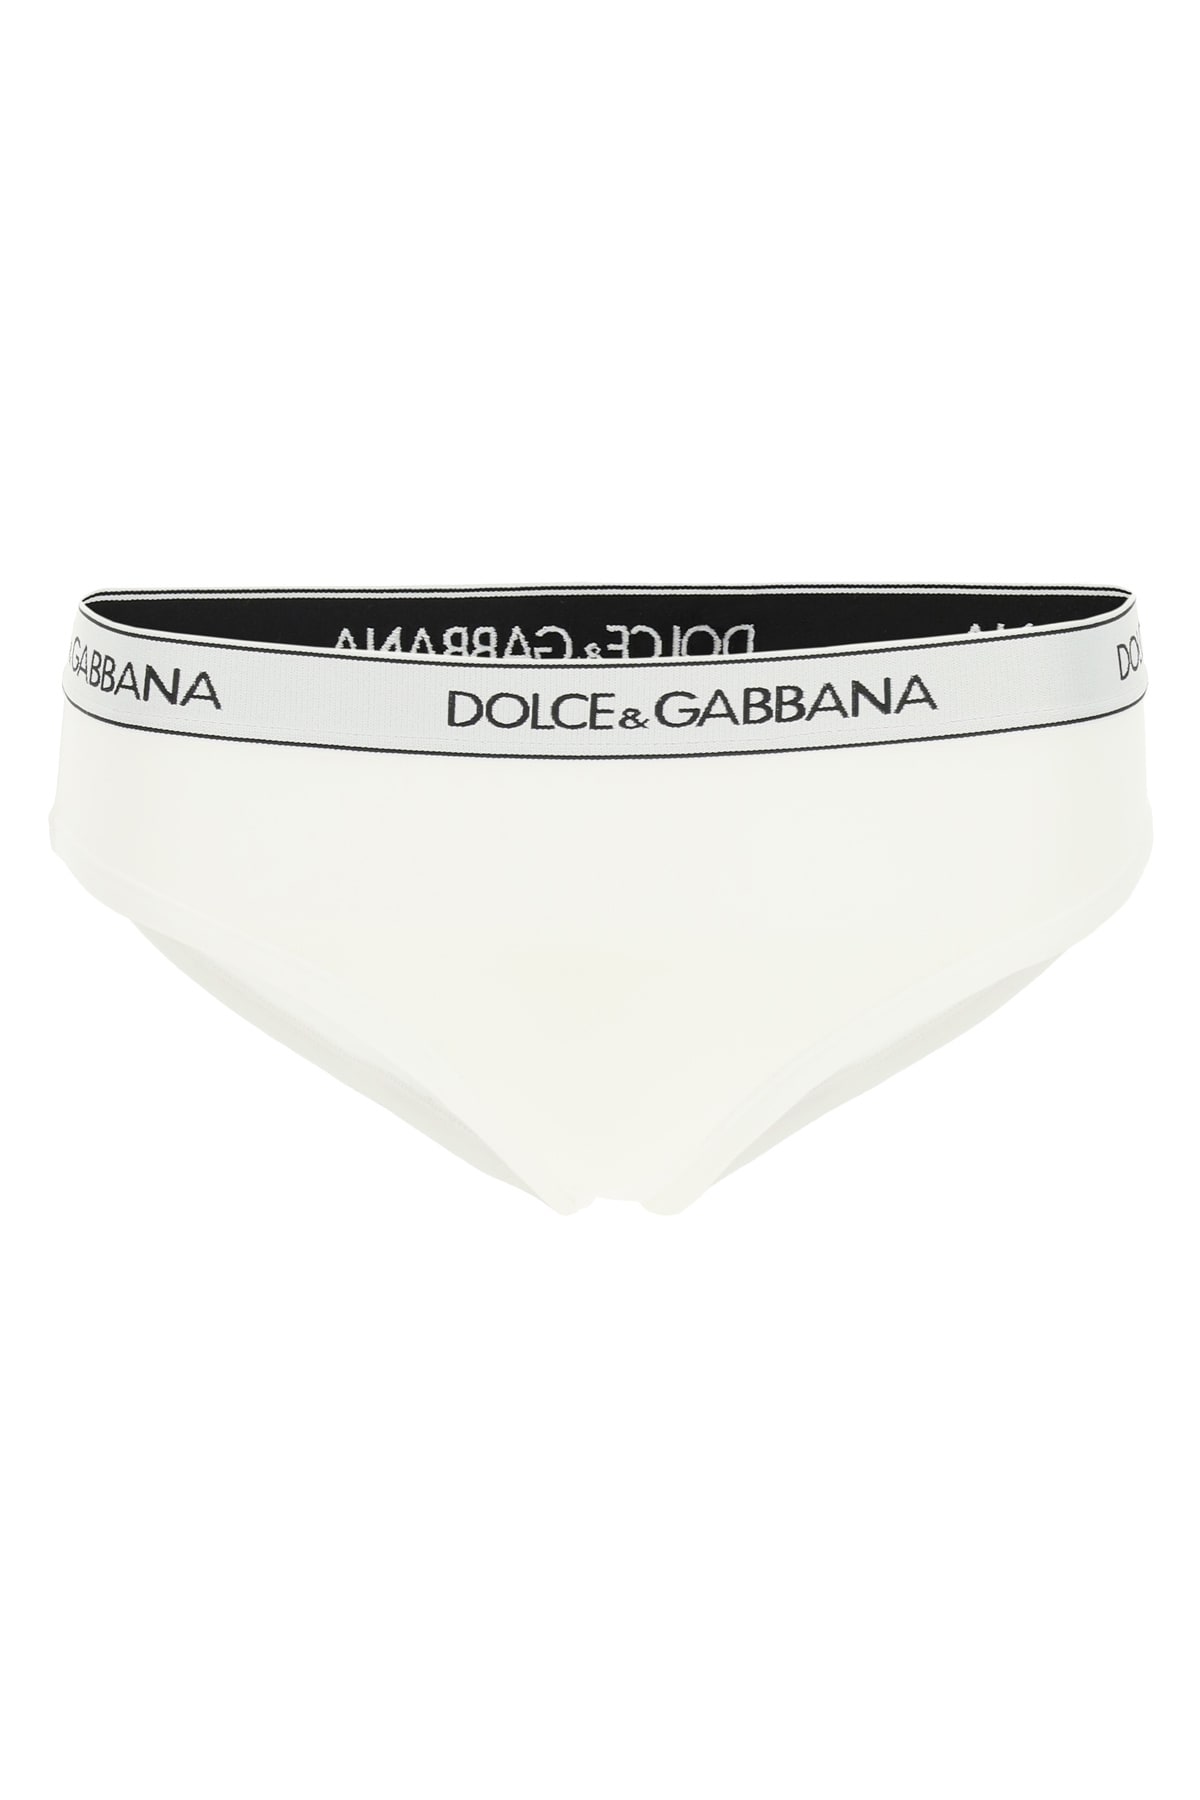 DOLCE & GABBANA JERSEY BRIEFS WITH LOGO BAND,O2B20T FUGJT W0800